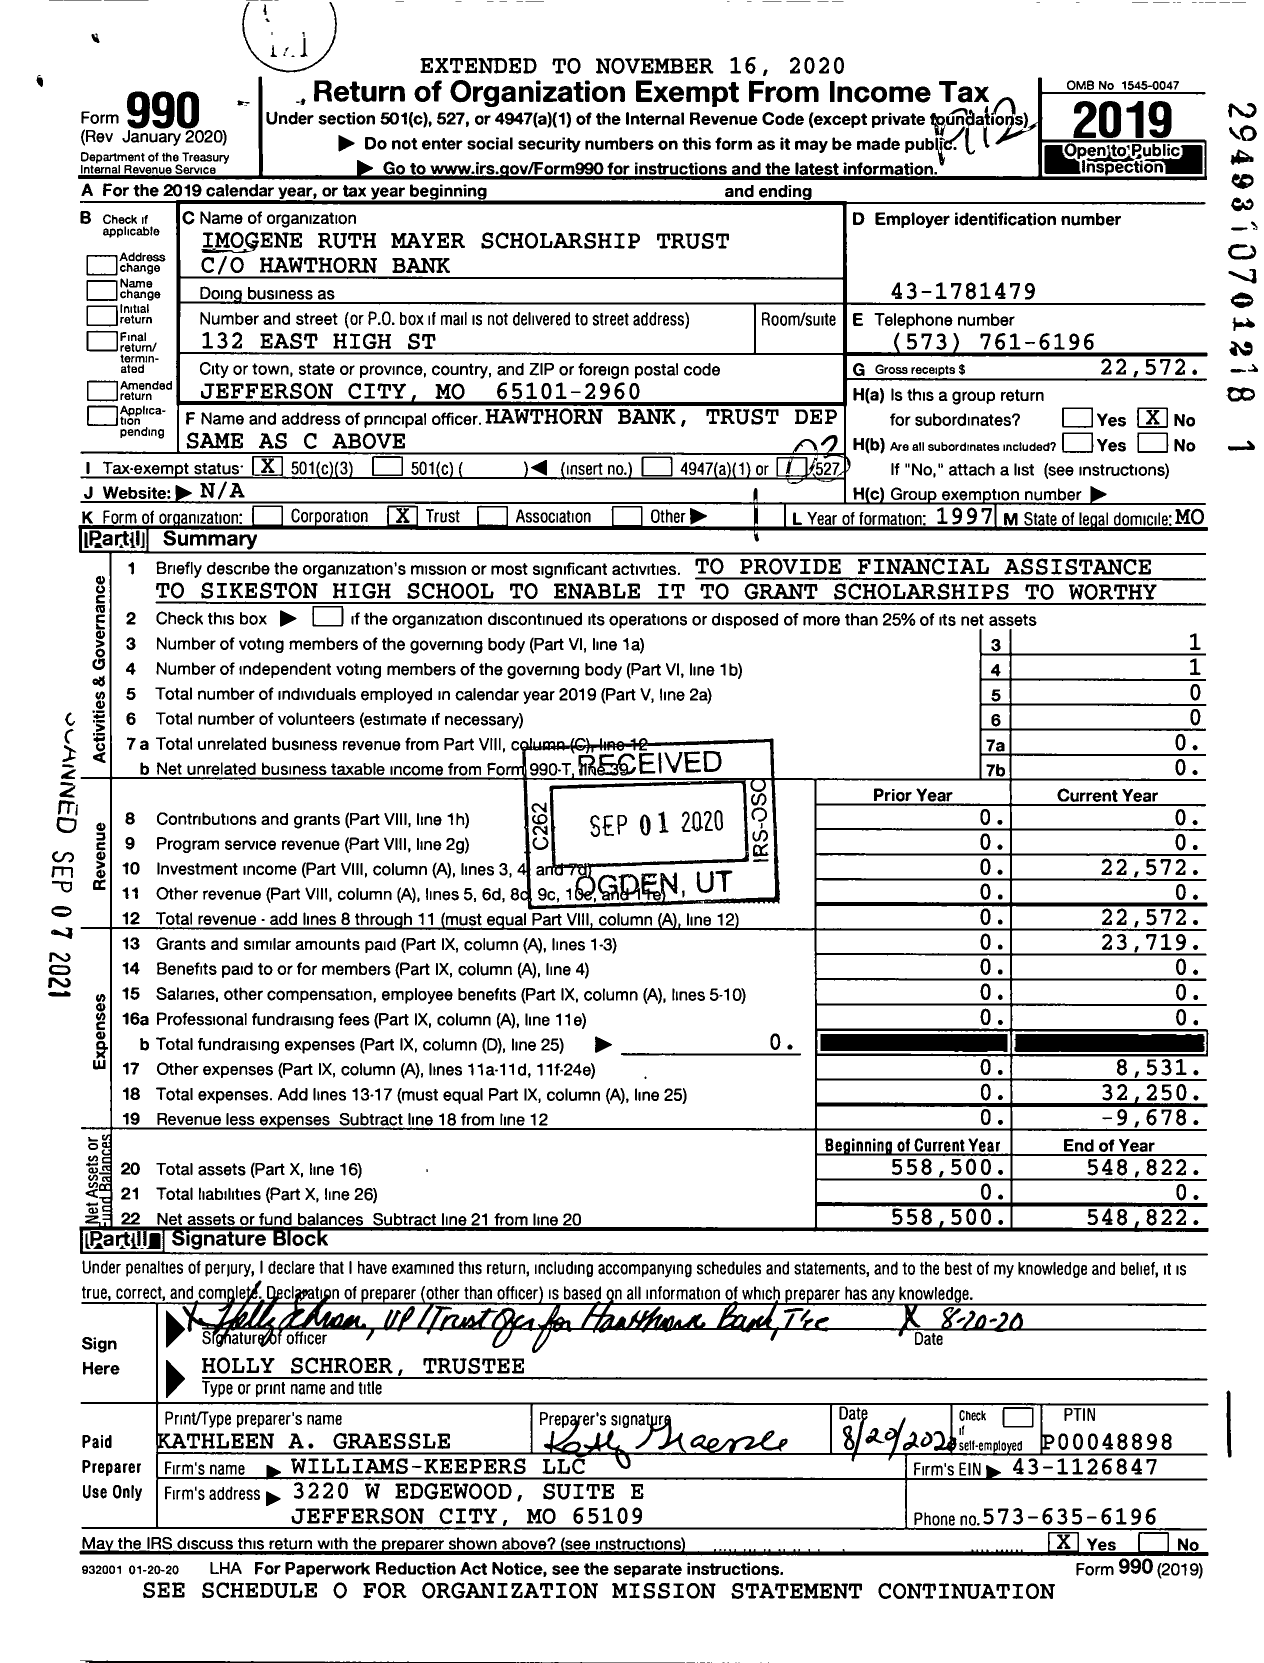 Image of first page of 2019 Form 990 for Imogene Ruth Mayer Scholarship Trust